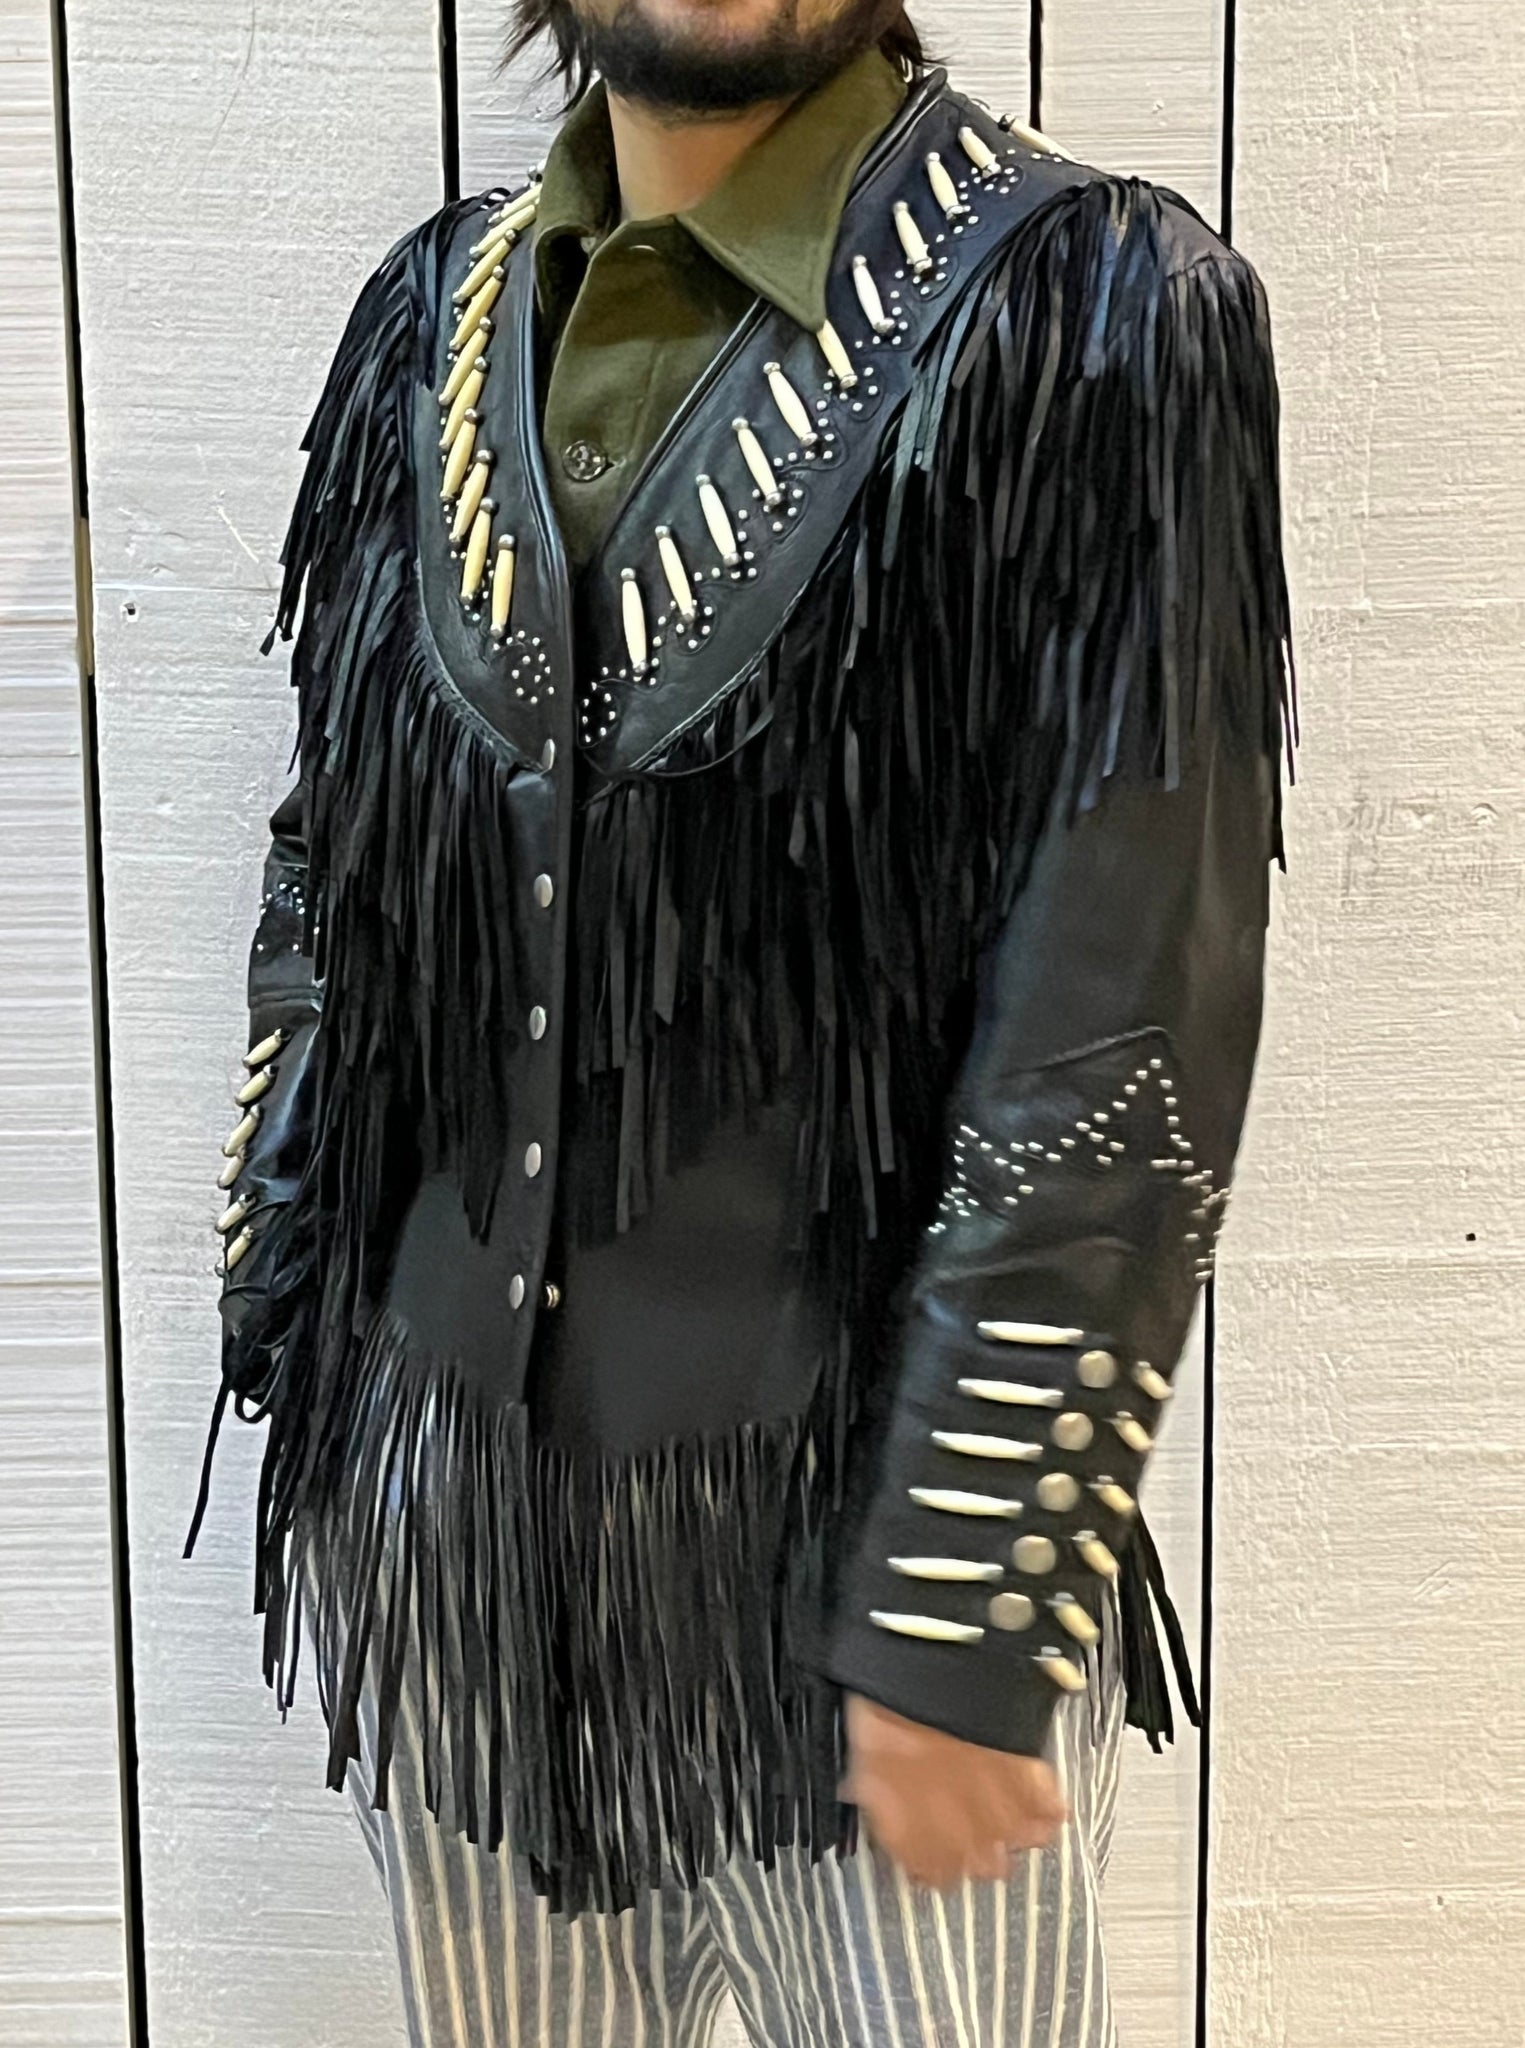 Vintage Leather Fringed Jacket, previously owned by June Carter